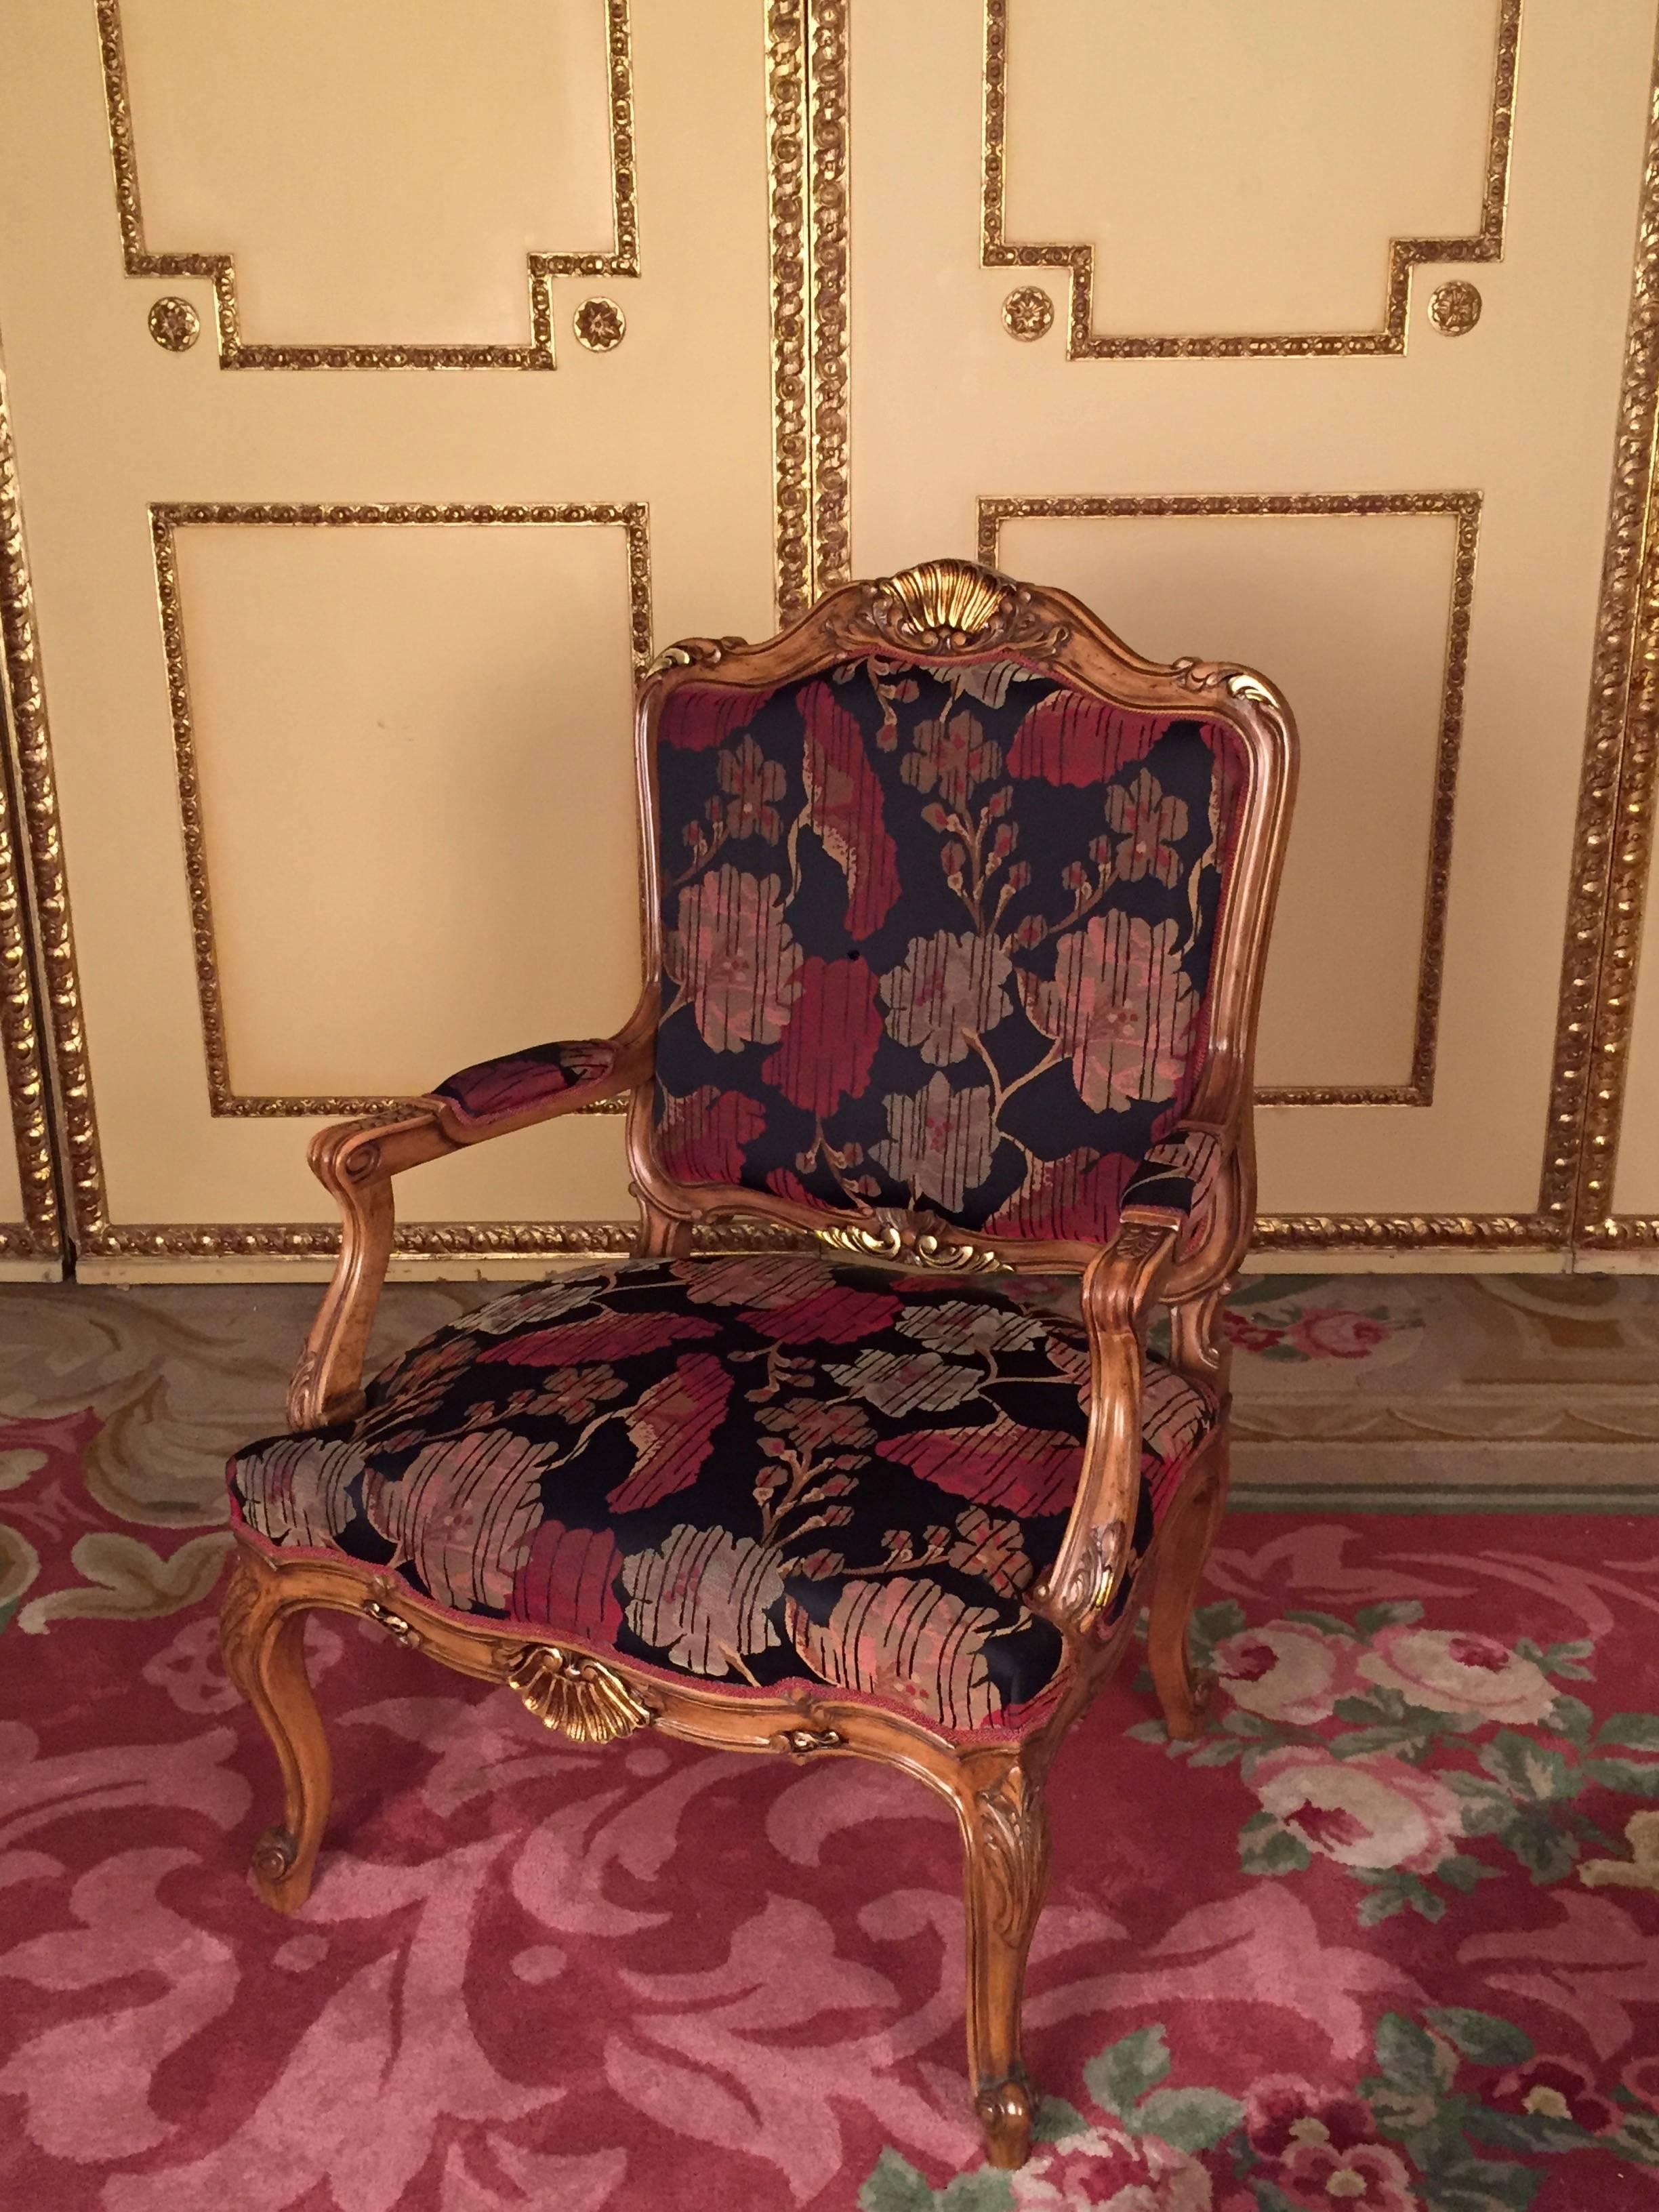 Extremely decorative and impressive armchair from the Neo-Baroque period.
Wooden body made of solid walnut. Upholstered seat and backrest. Cover made of high quality fabric.


(C-134)